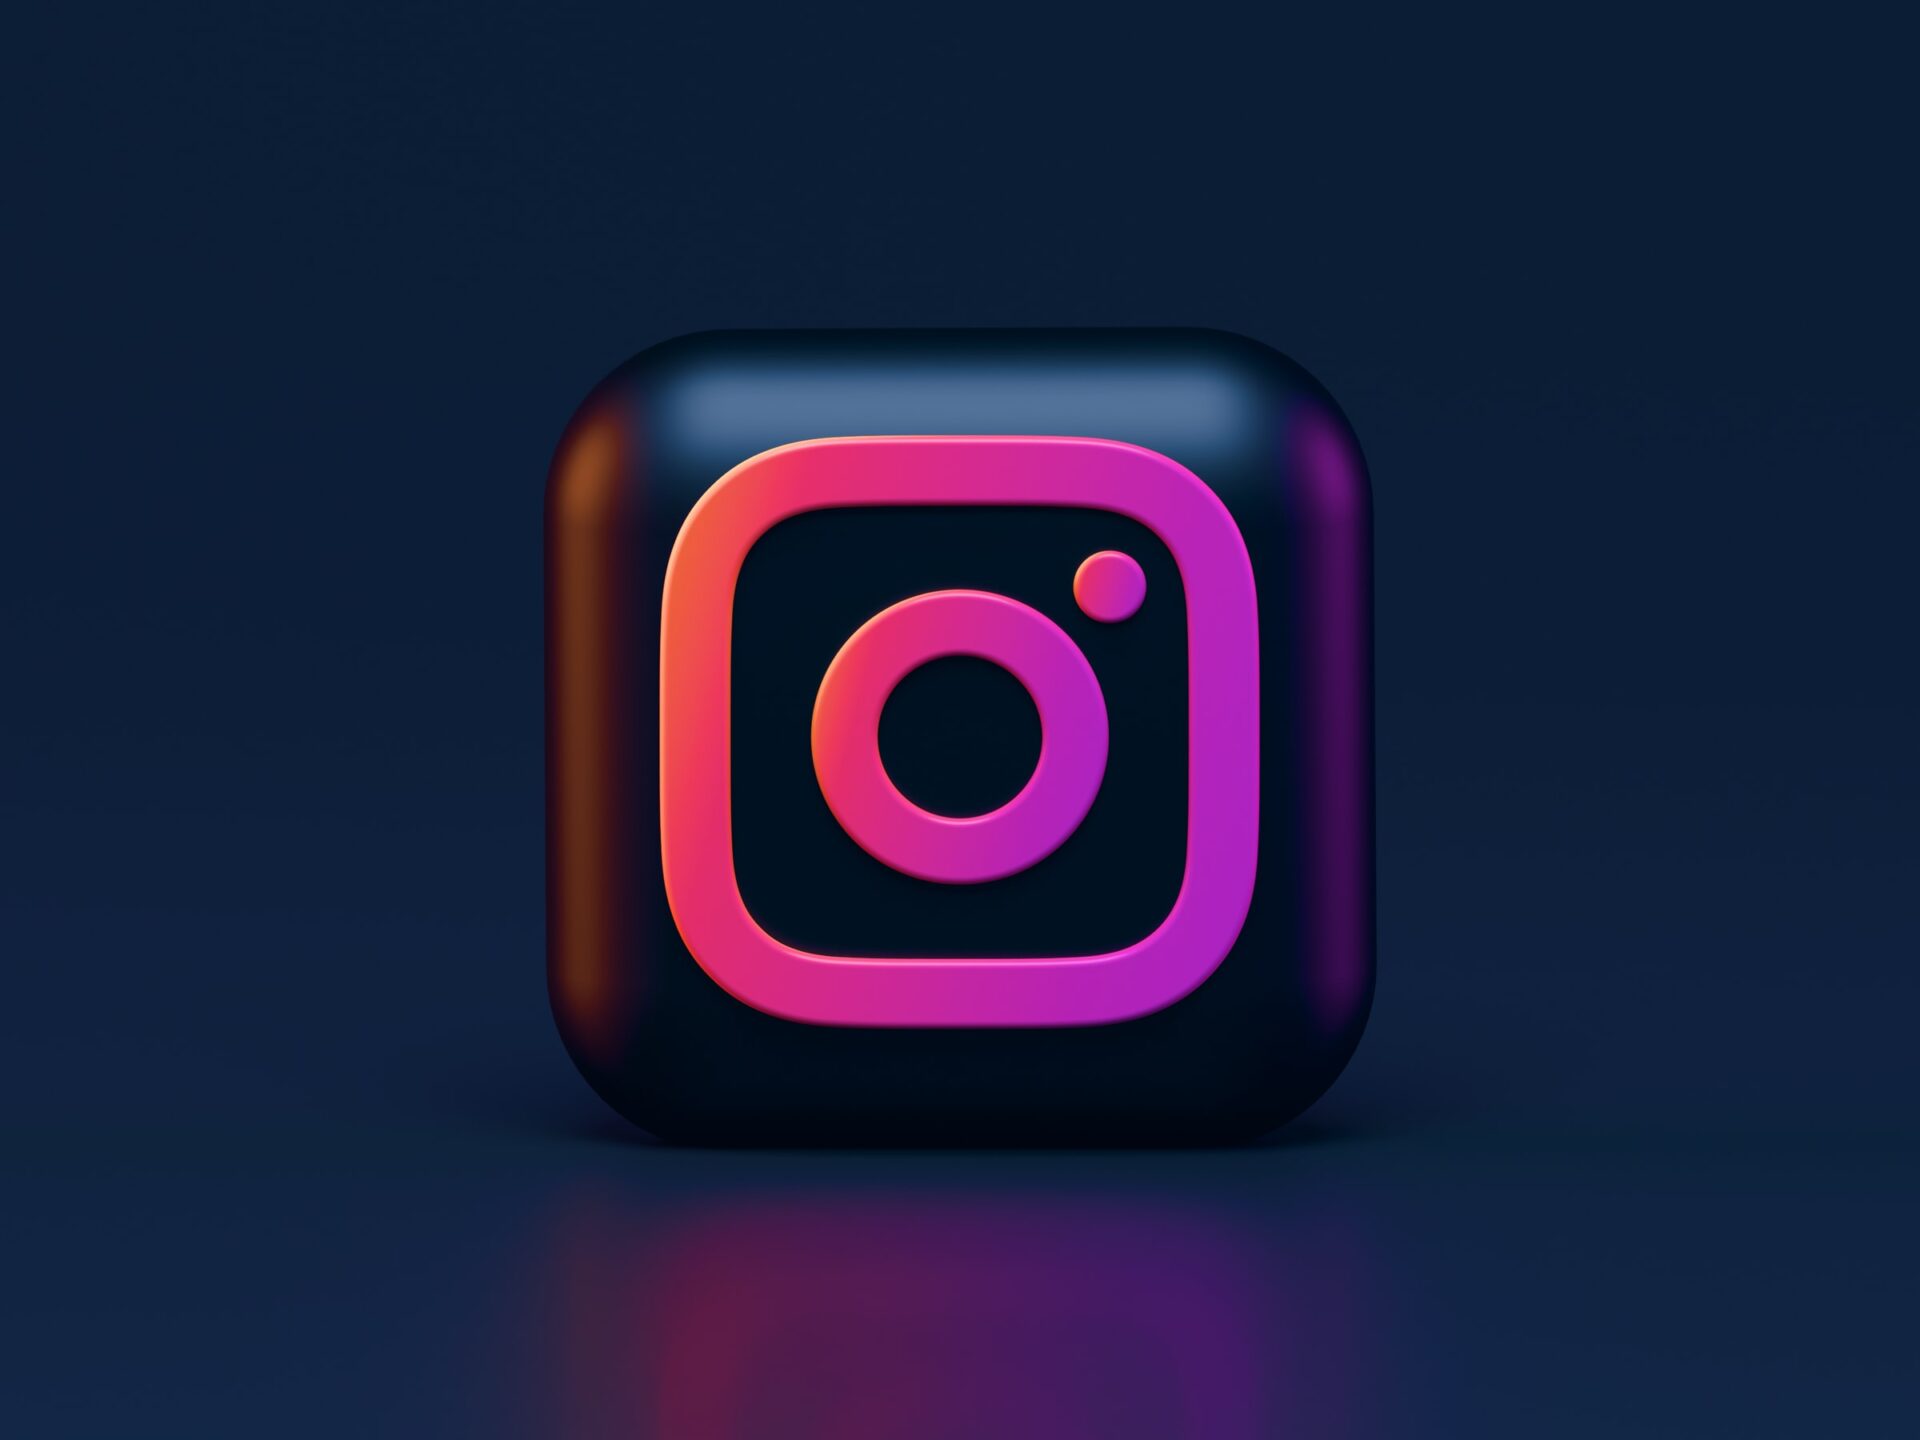 Instagram continues to perform well despite inconsistent brand identity - theentertainment.vision